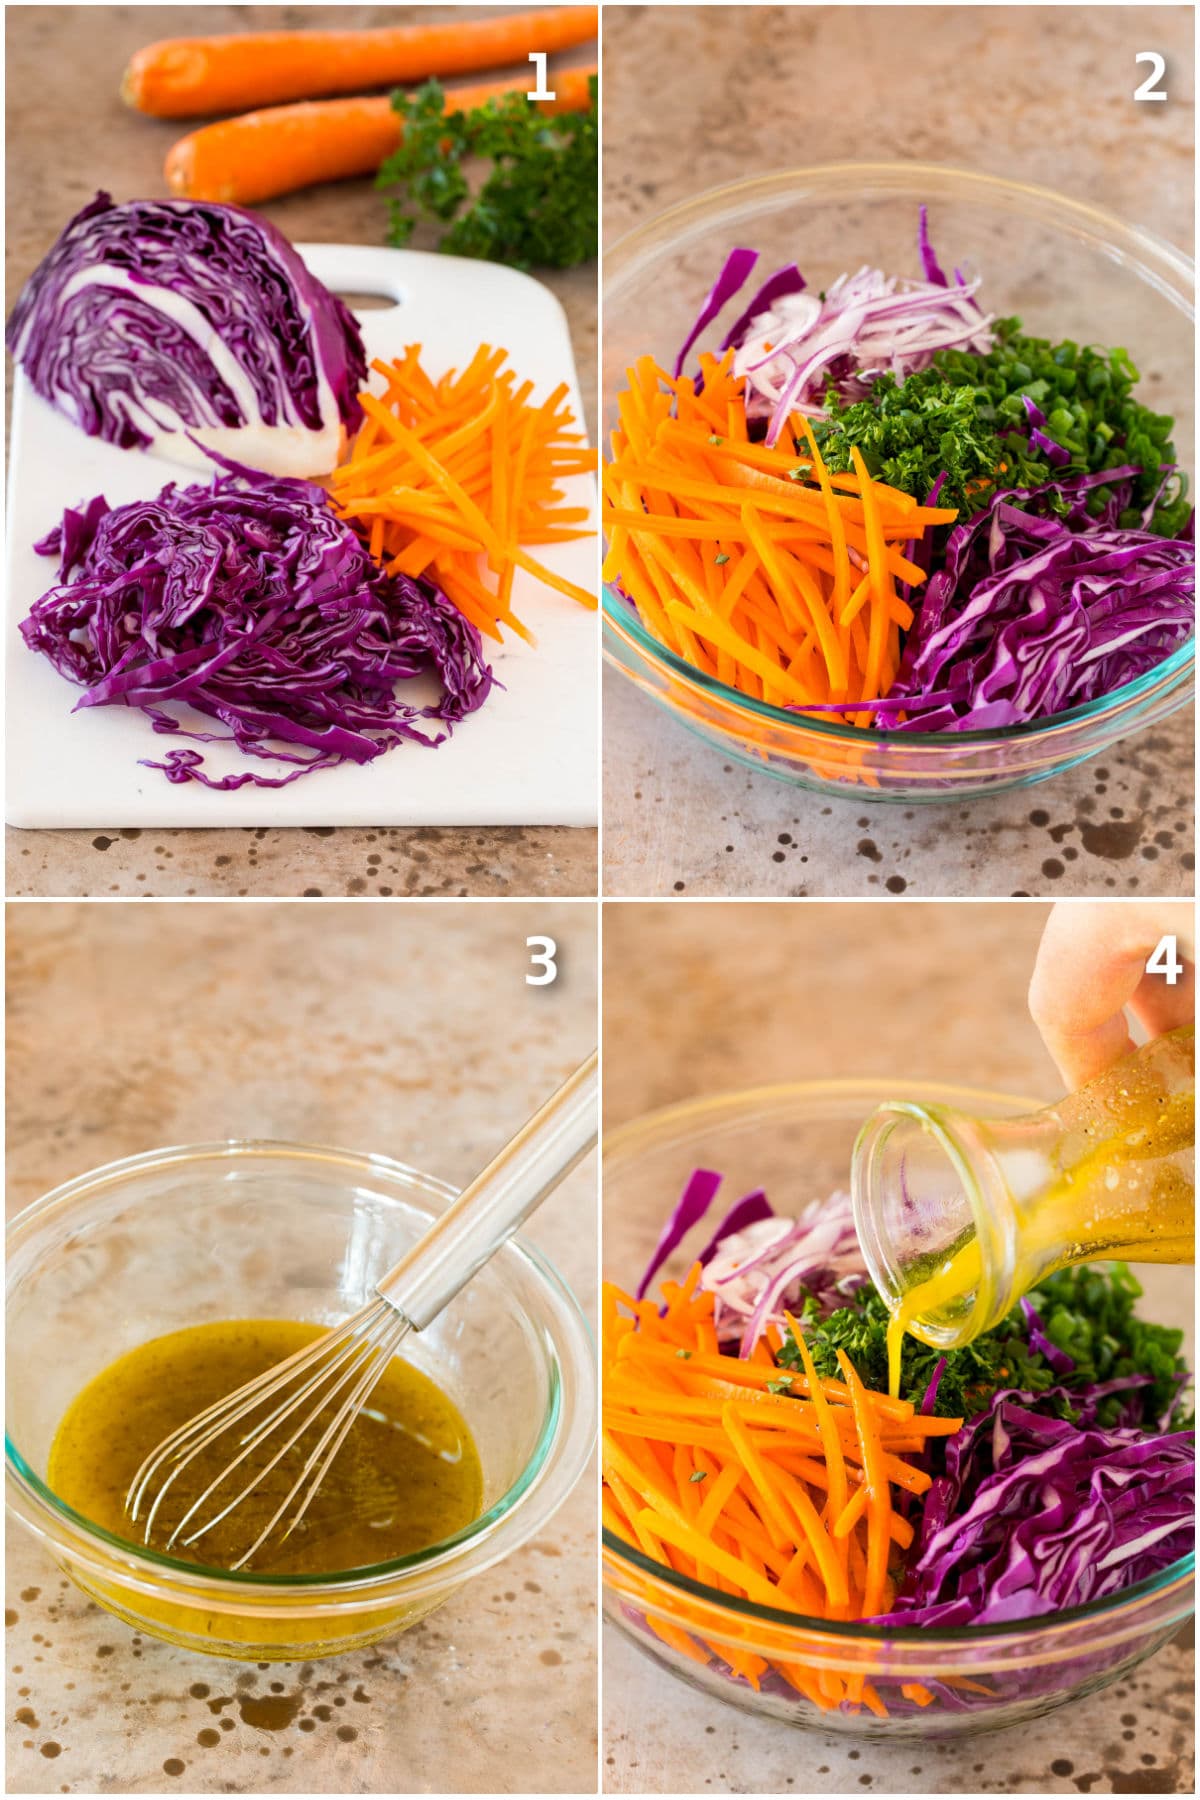 Process shots showing cabbage slaw being made.